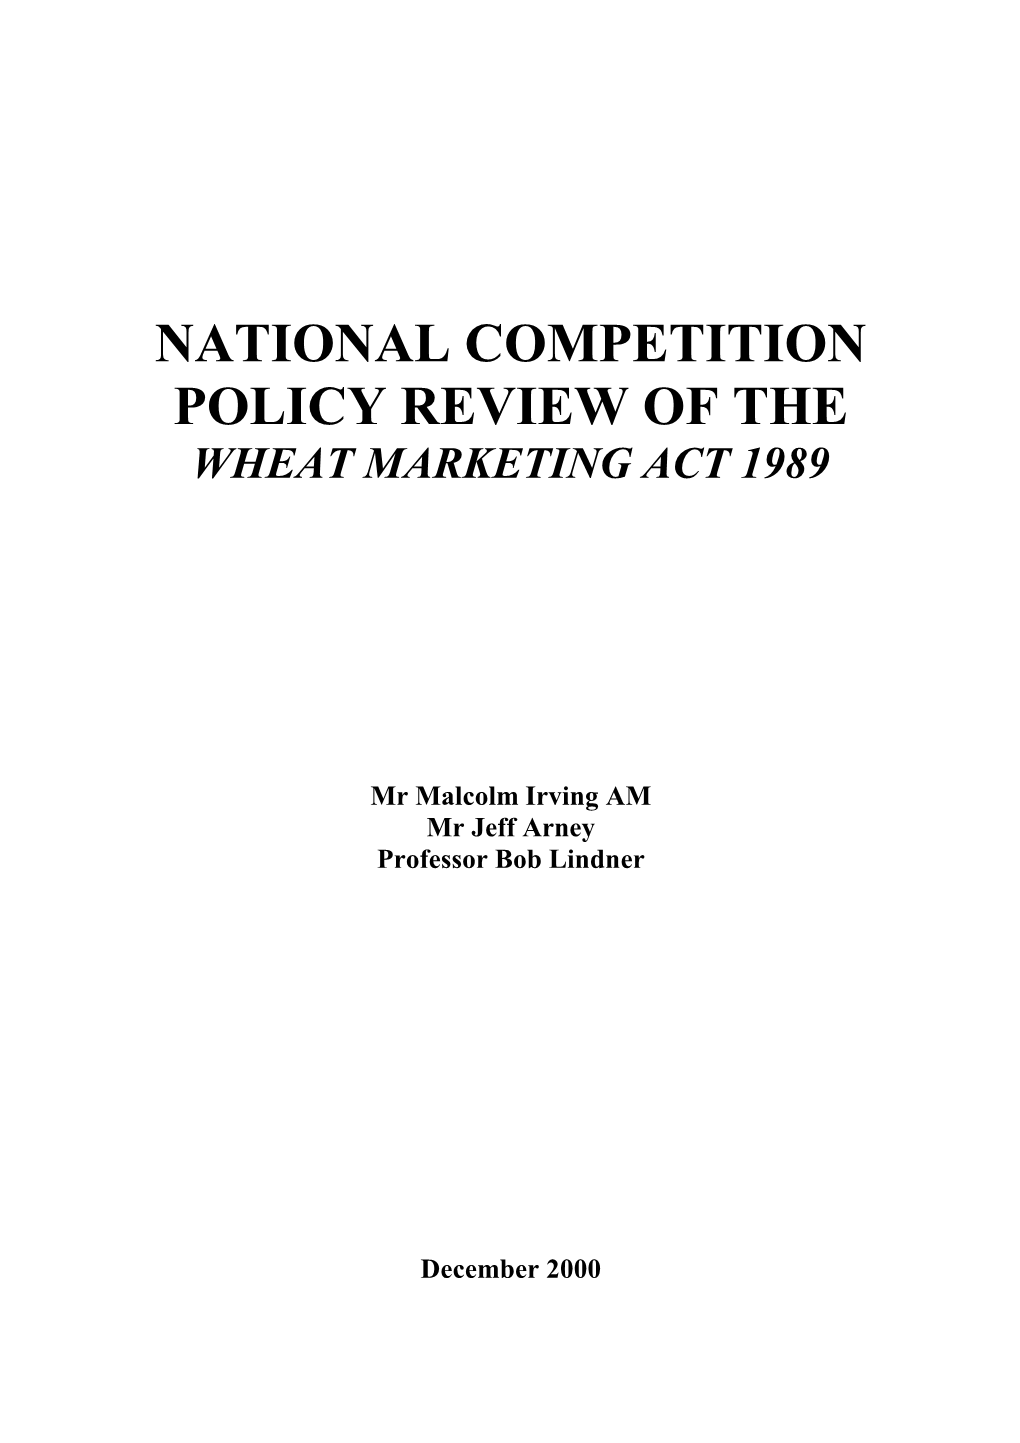 Australian Government Review of the Wheat Marketing Act 1989, December 2000